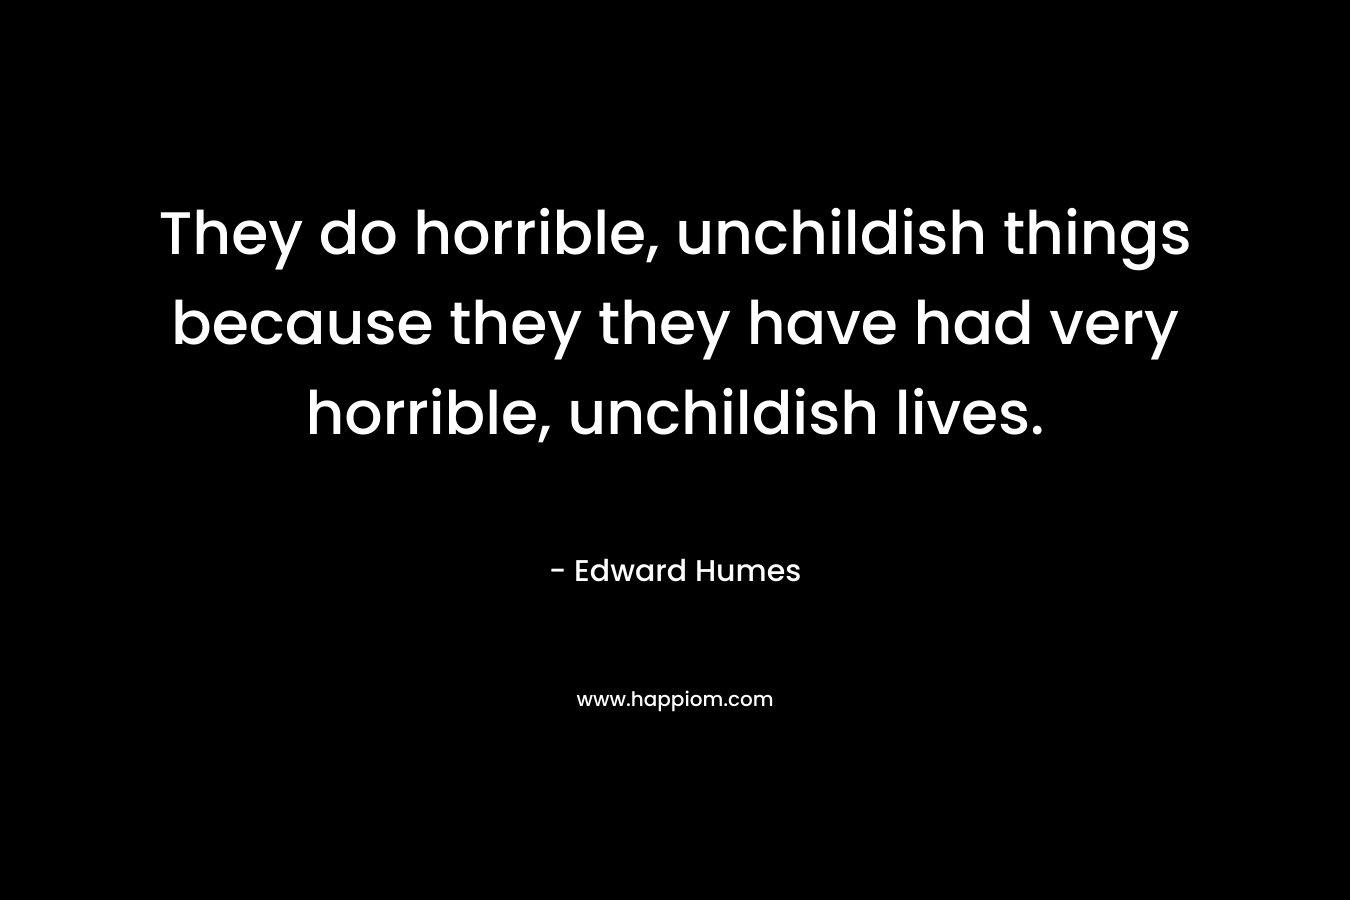 They do horrible, unchildish things because they they have had very horrible, unchildish lives. – Edward Humes